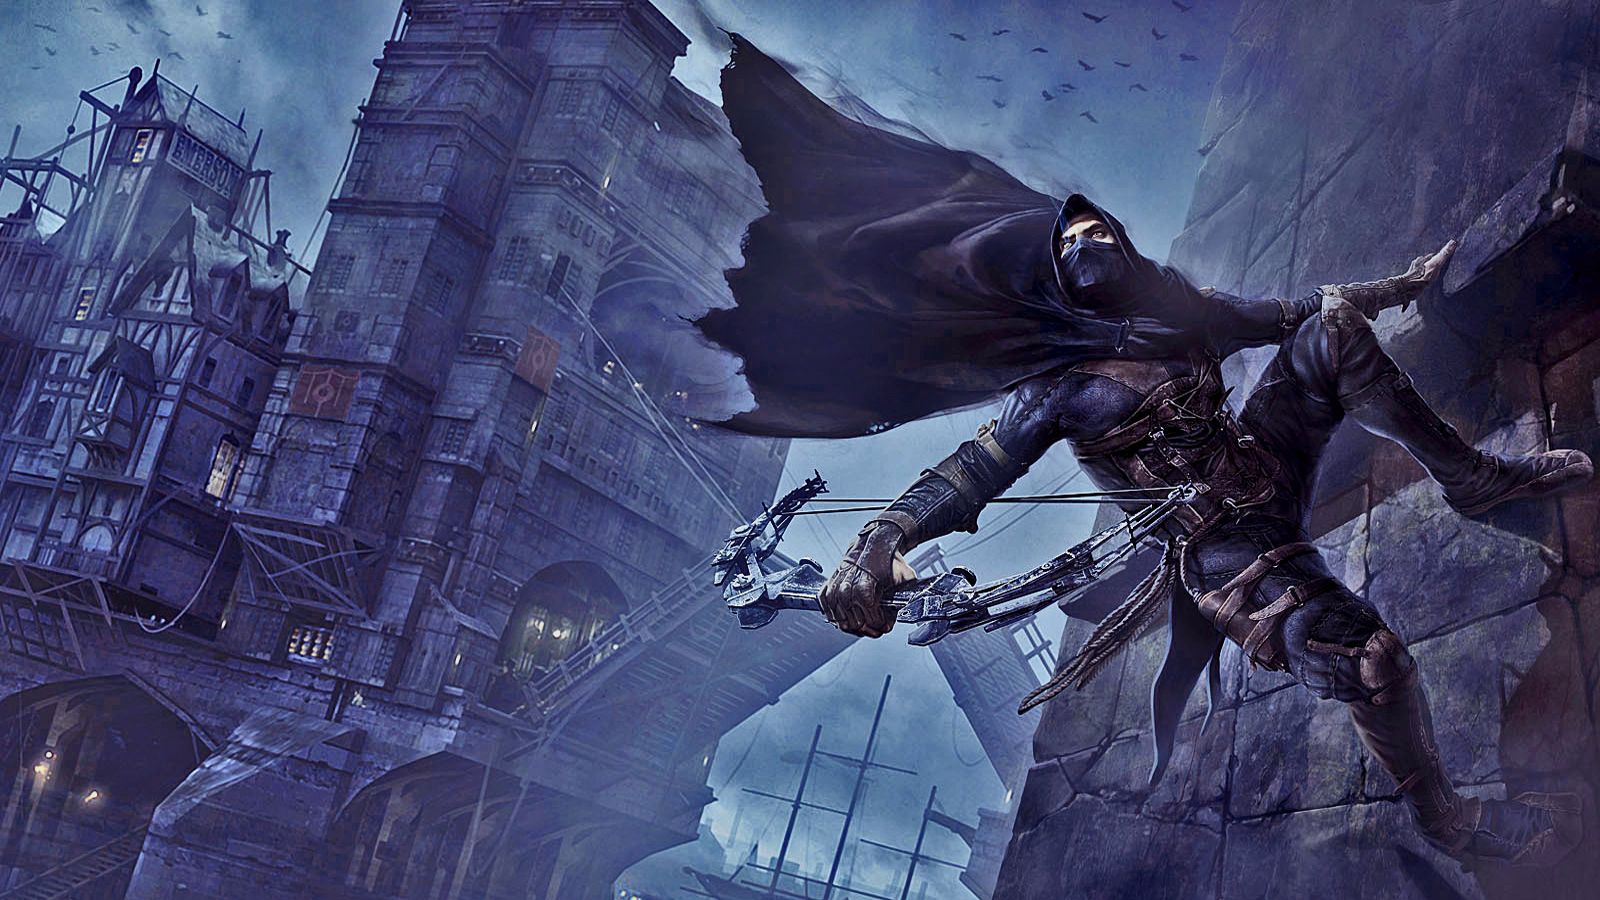 Thief Video Game Wallpaper | Live HD Wallpapers